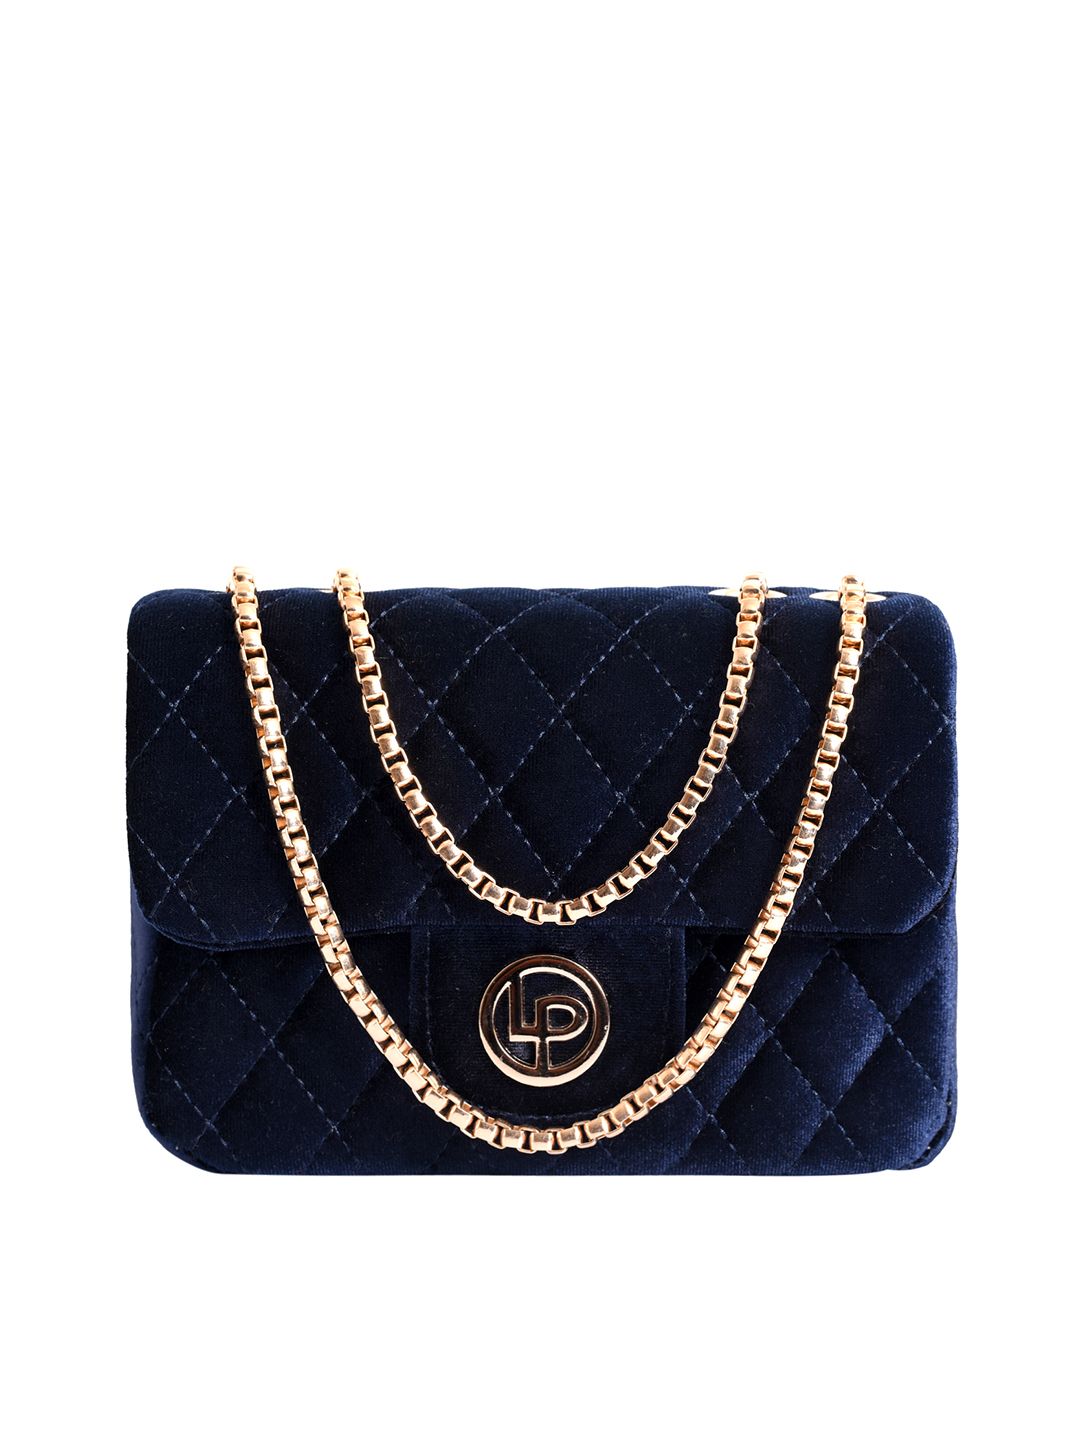 Lino Perros Navy Blue Quilted Shoulder Bag with Velvet Finish Price in India